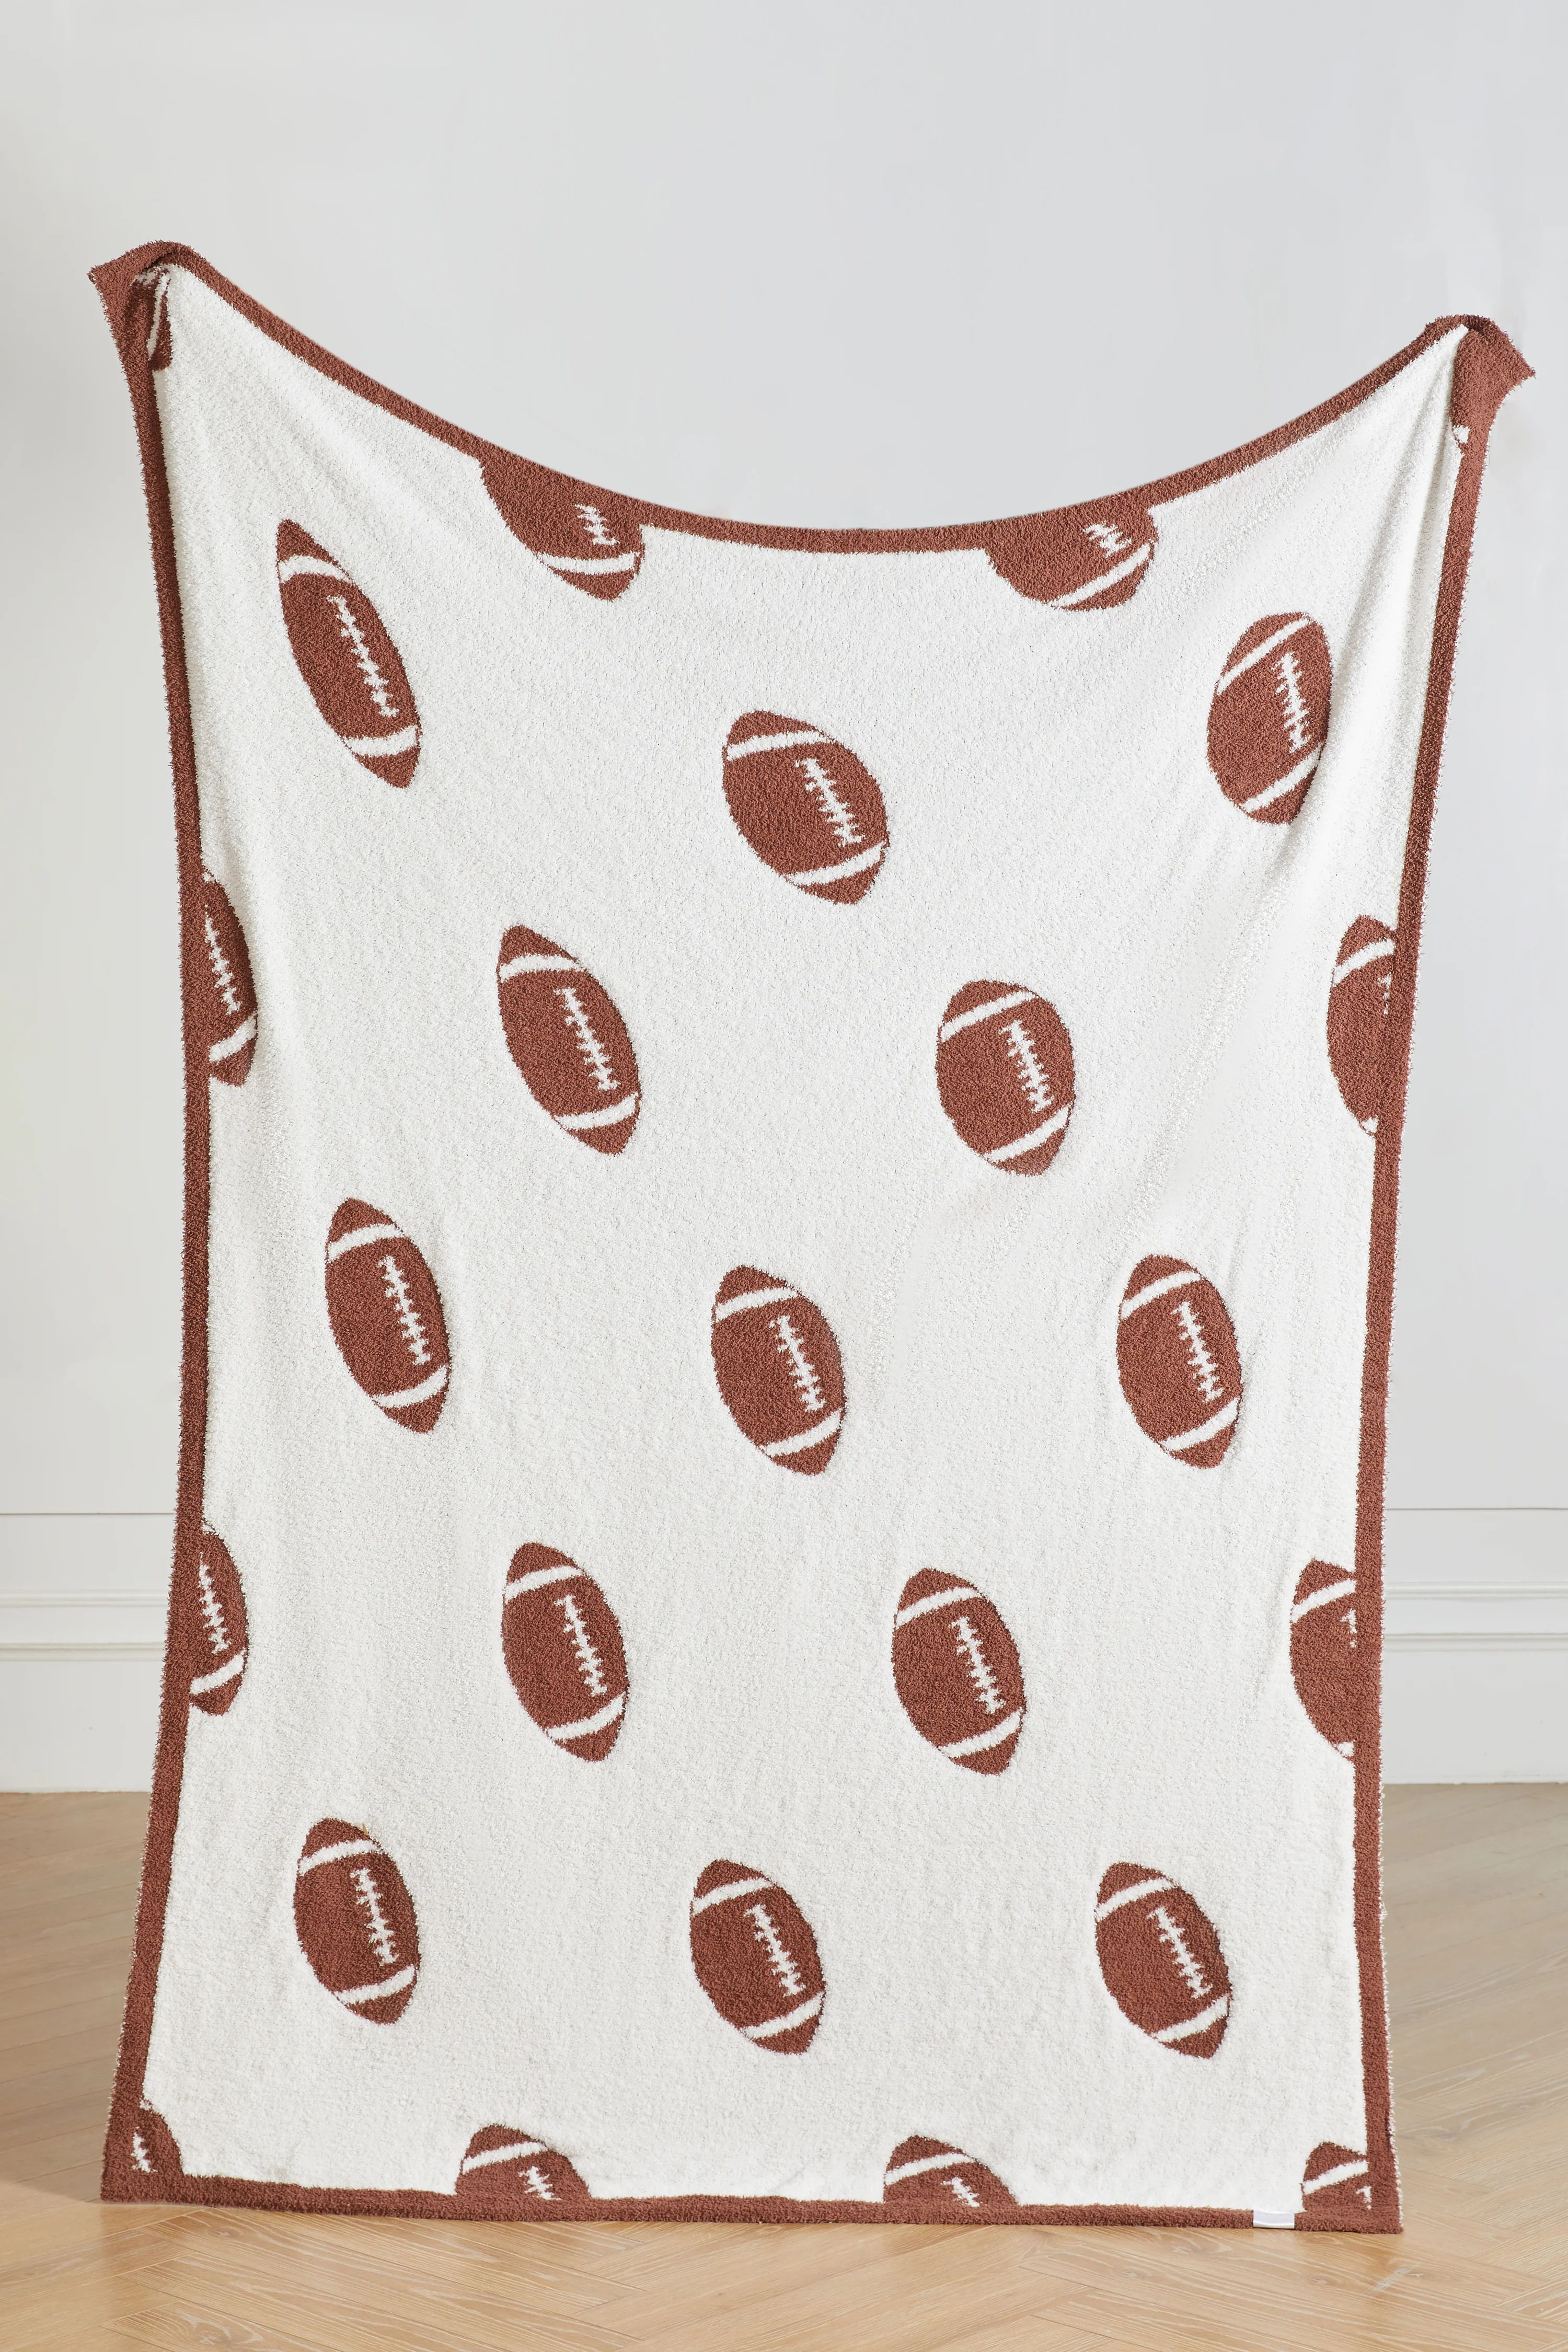 Football Buttery Blanket | The Styled Collection